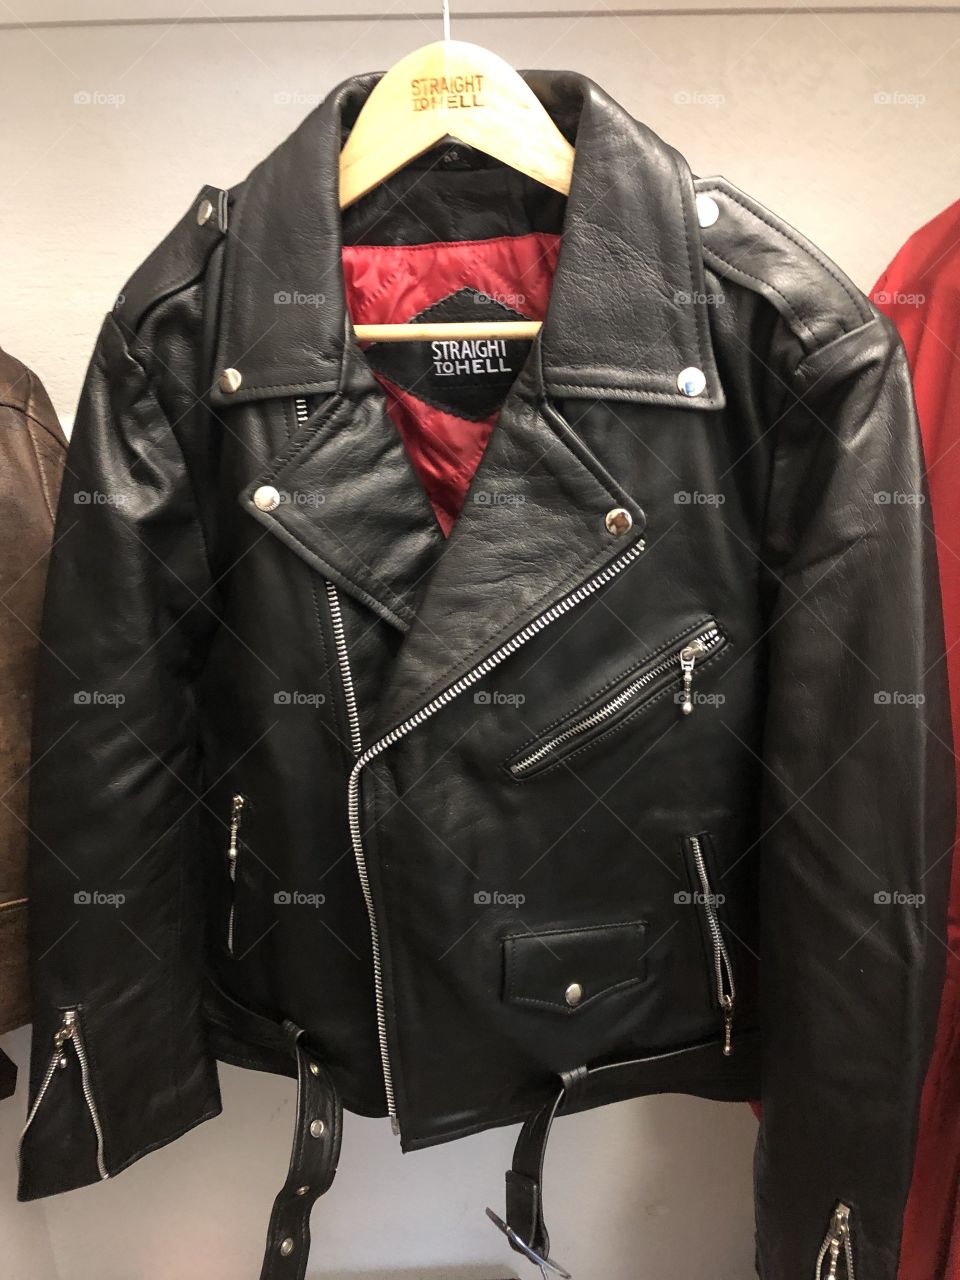 Fresh out of the box... a classic leather jacket